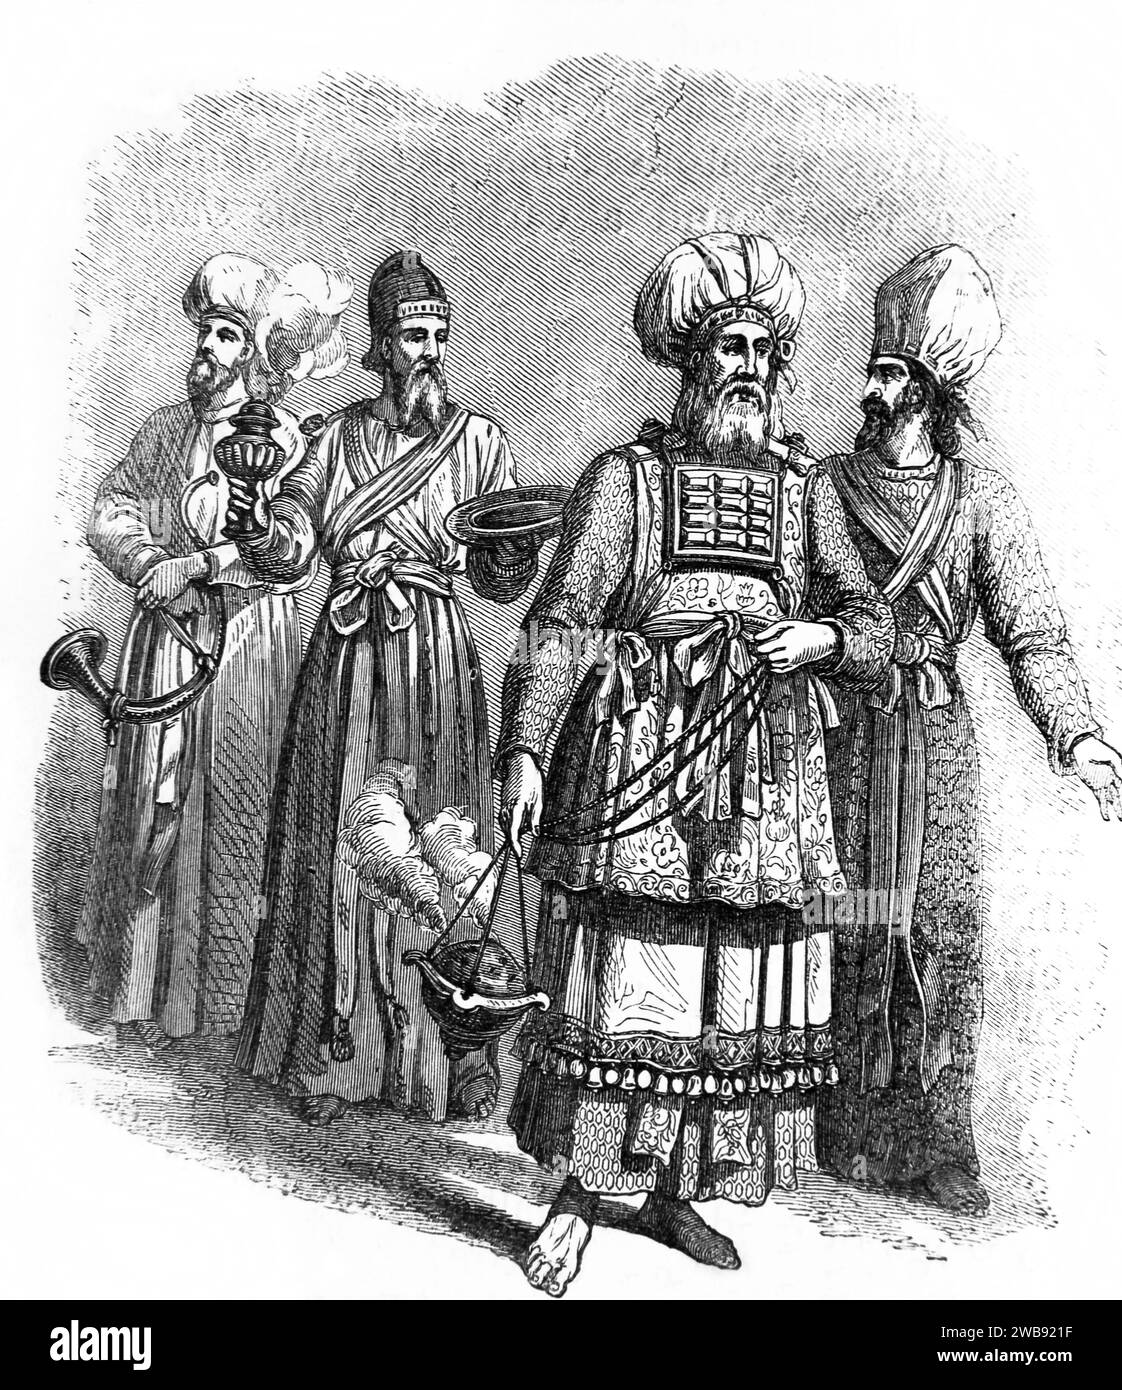 Illustration of the Hebrew High Priests and Priests with Incense Burner (Thurible) at the Tabernacle from Illustrated Family Bible Stock Photo